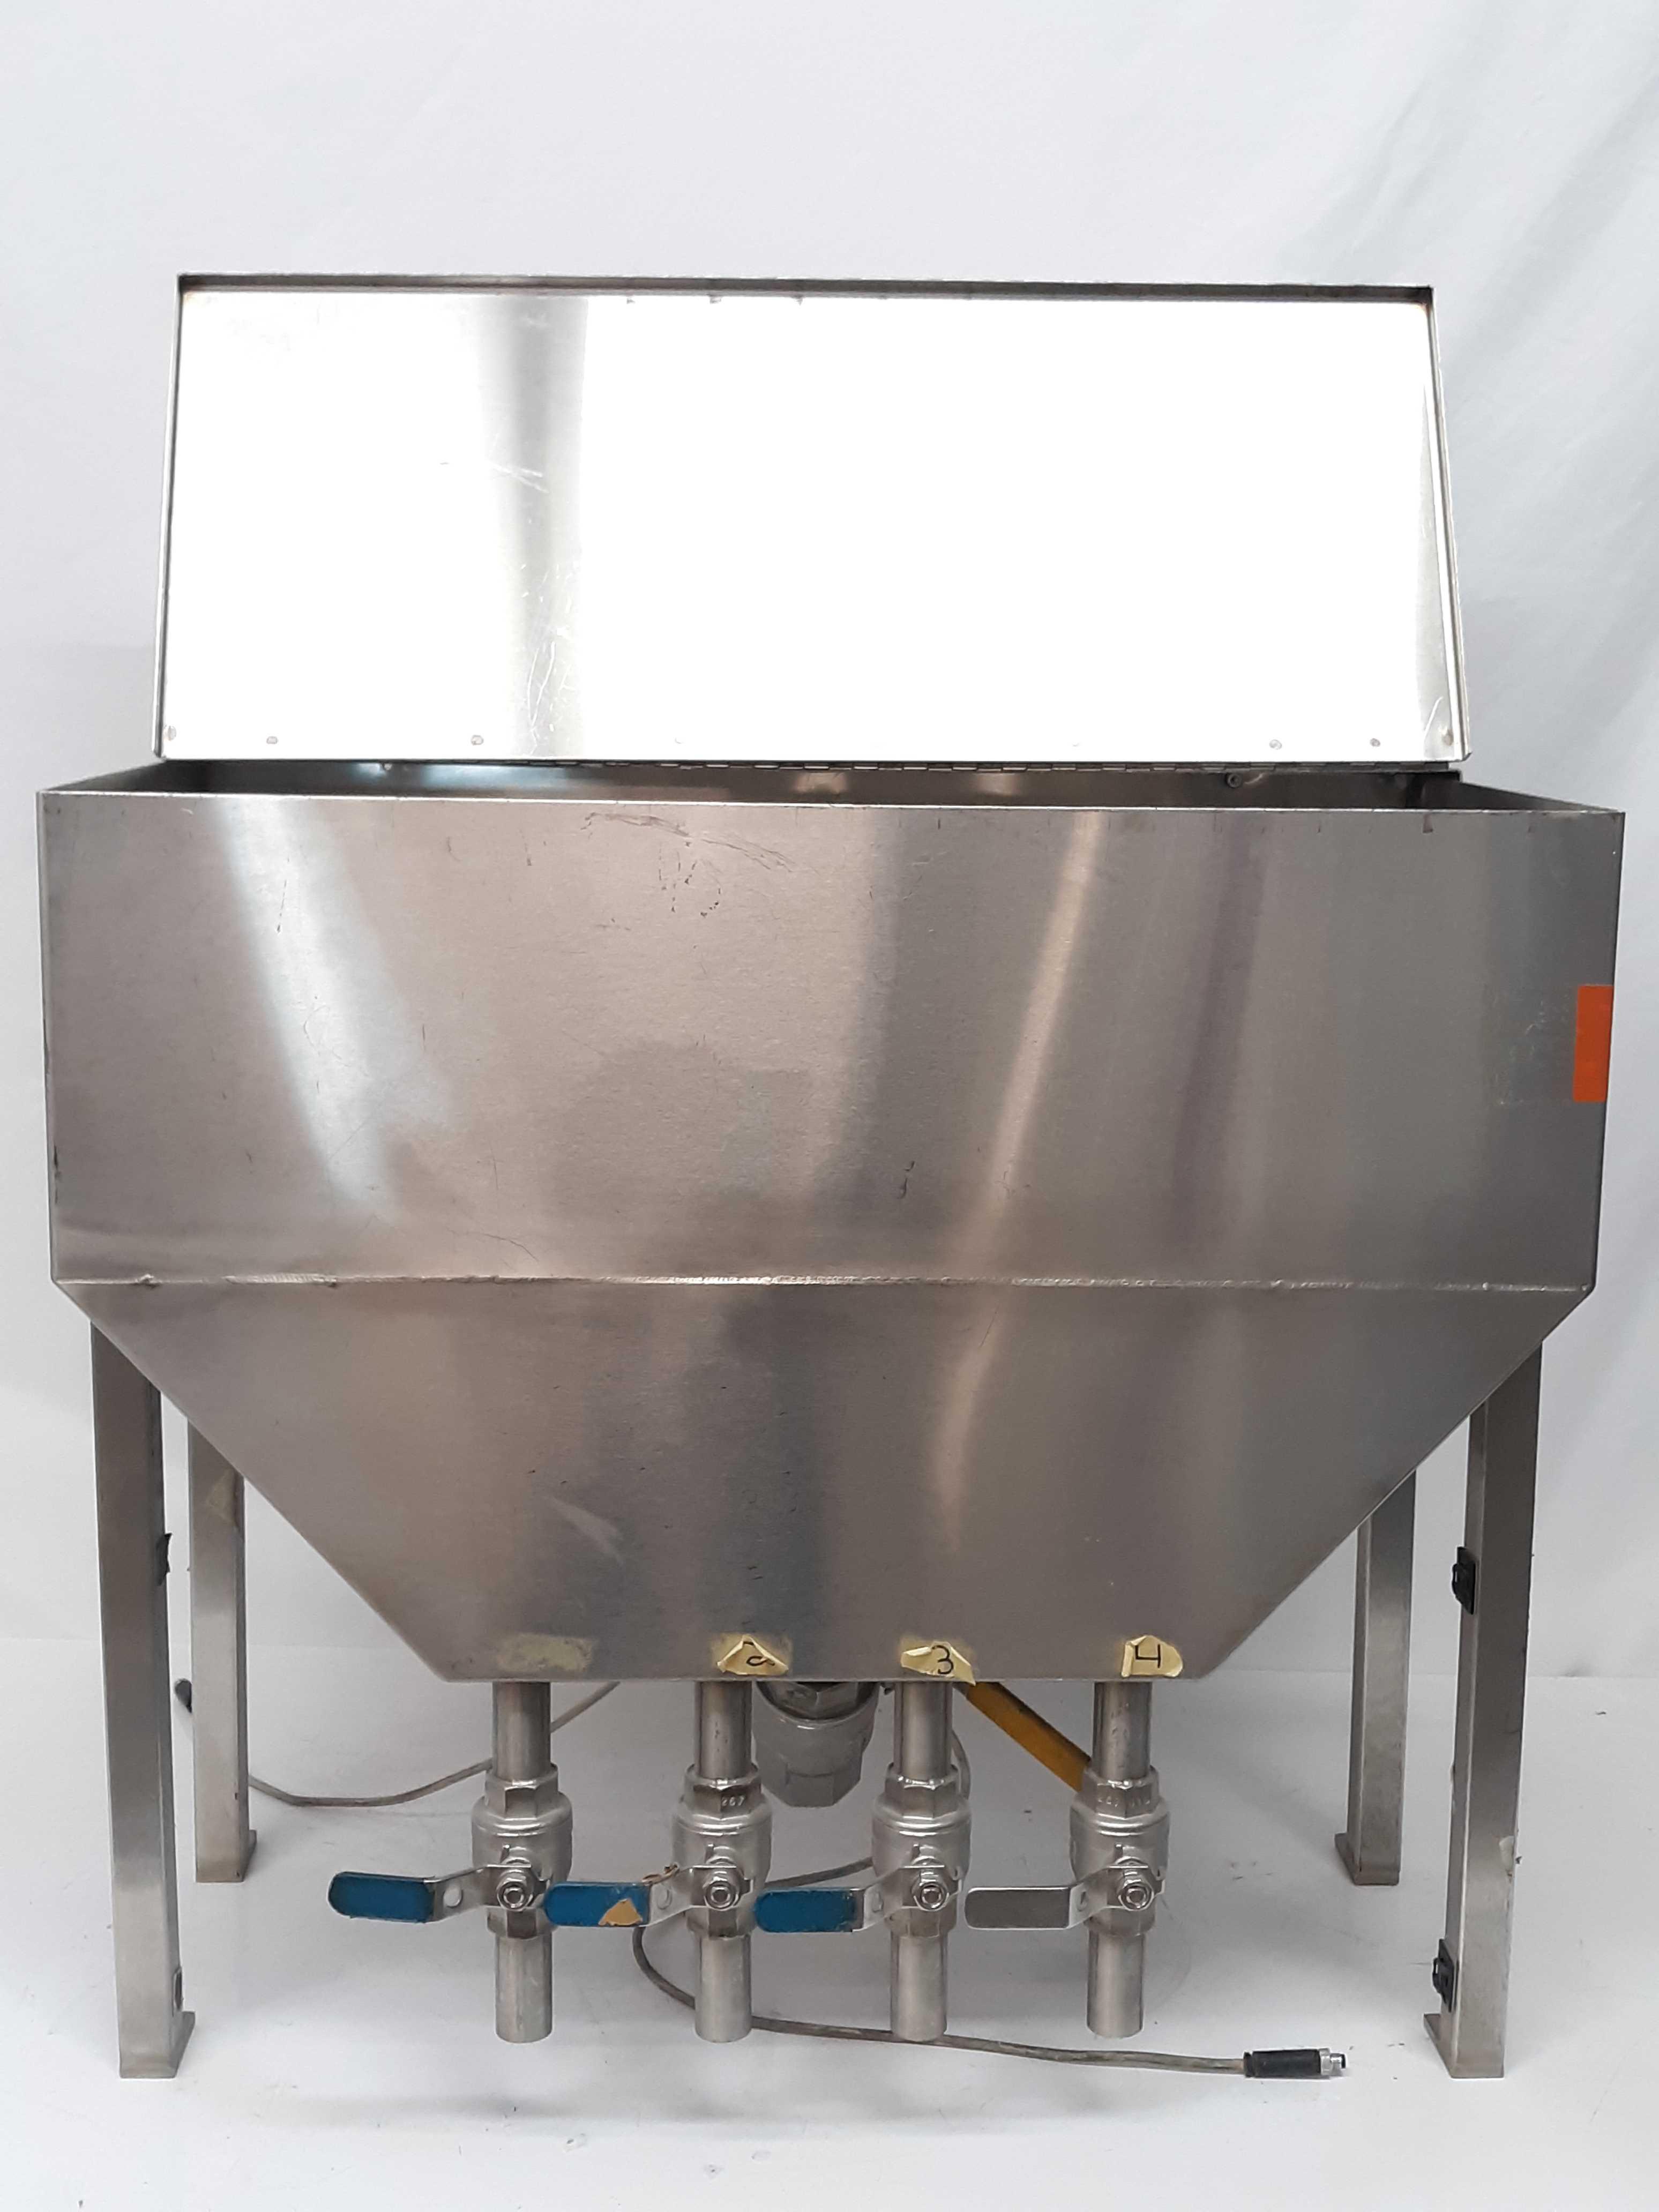 NEW AutomationDirect CUSTOM-1 Processing Stainless Steel Tank 